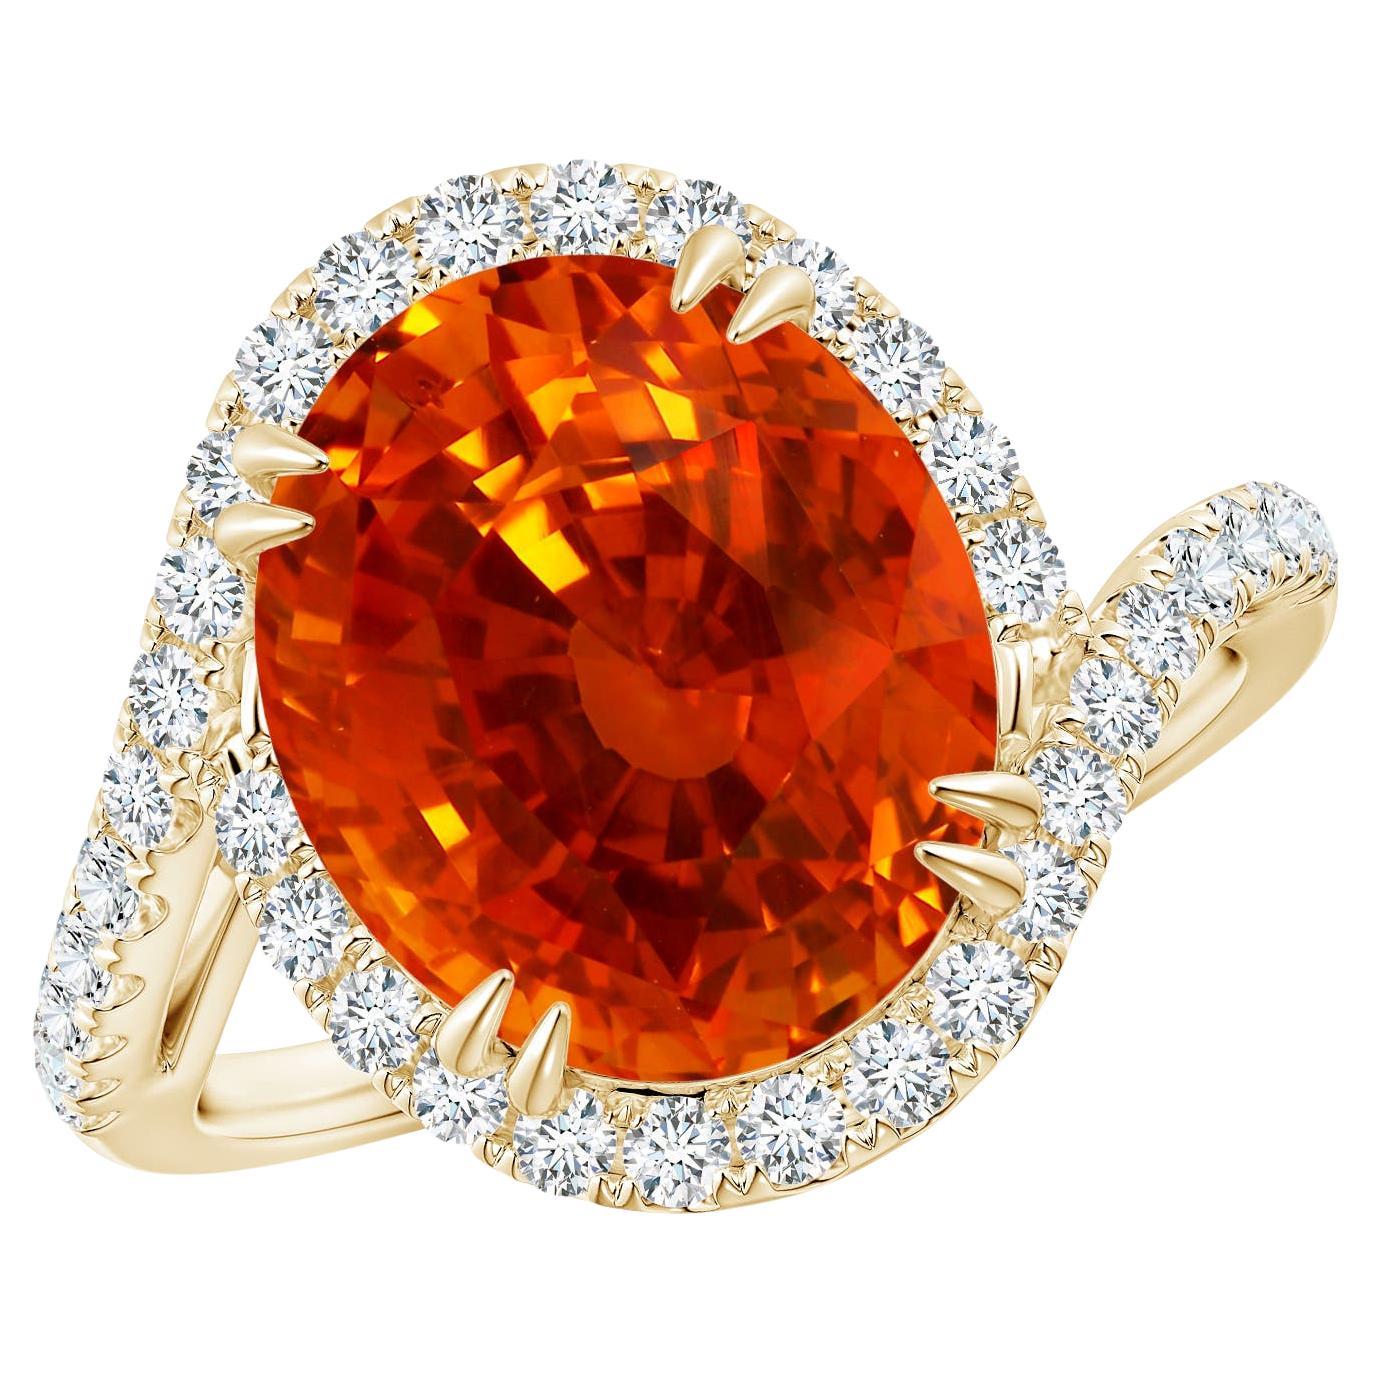 For Sale:  Angara GIA Certified Natural Orange Sapphire Ring in Yellow Gold with Diamonds